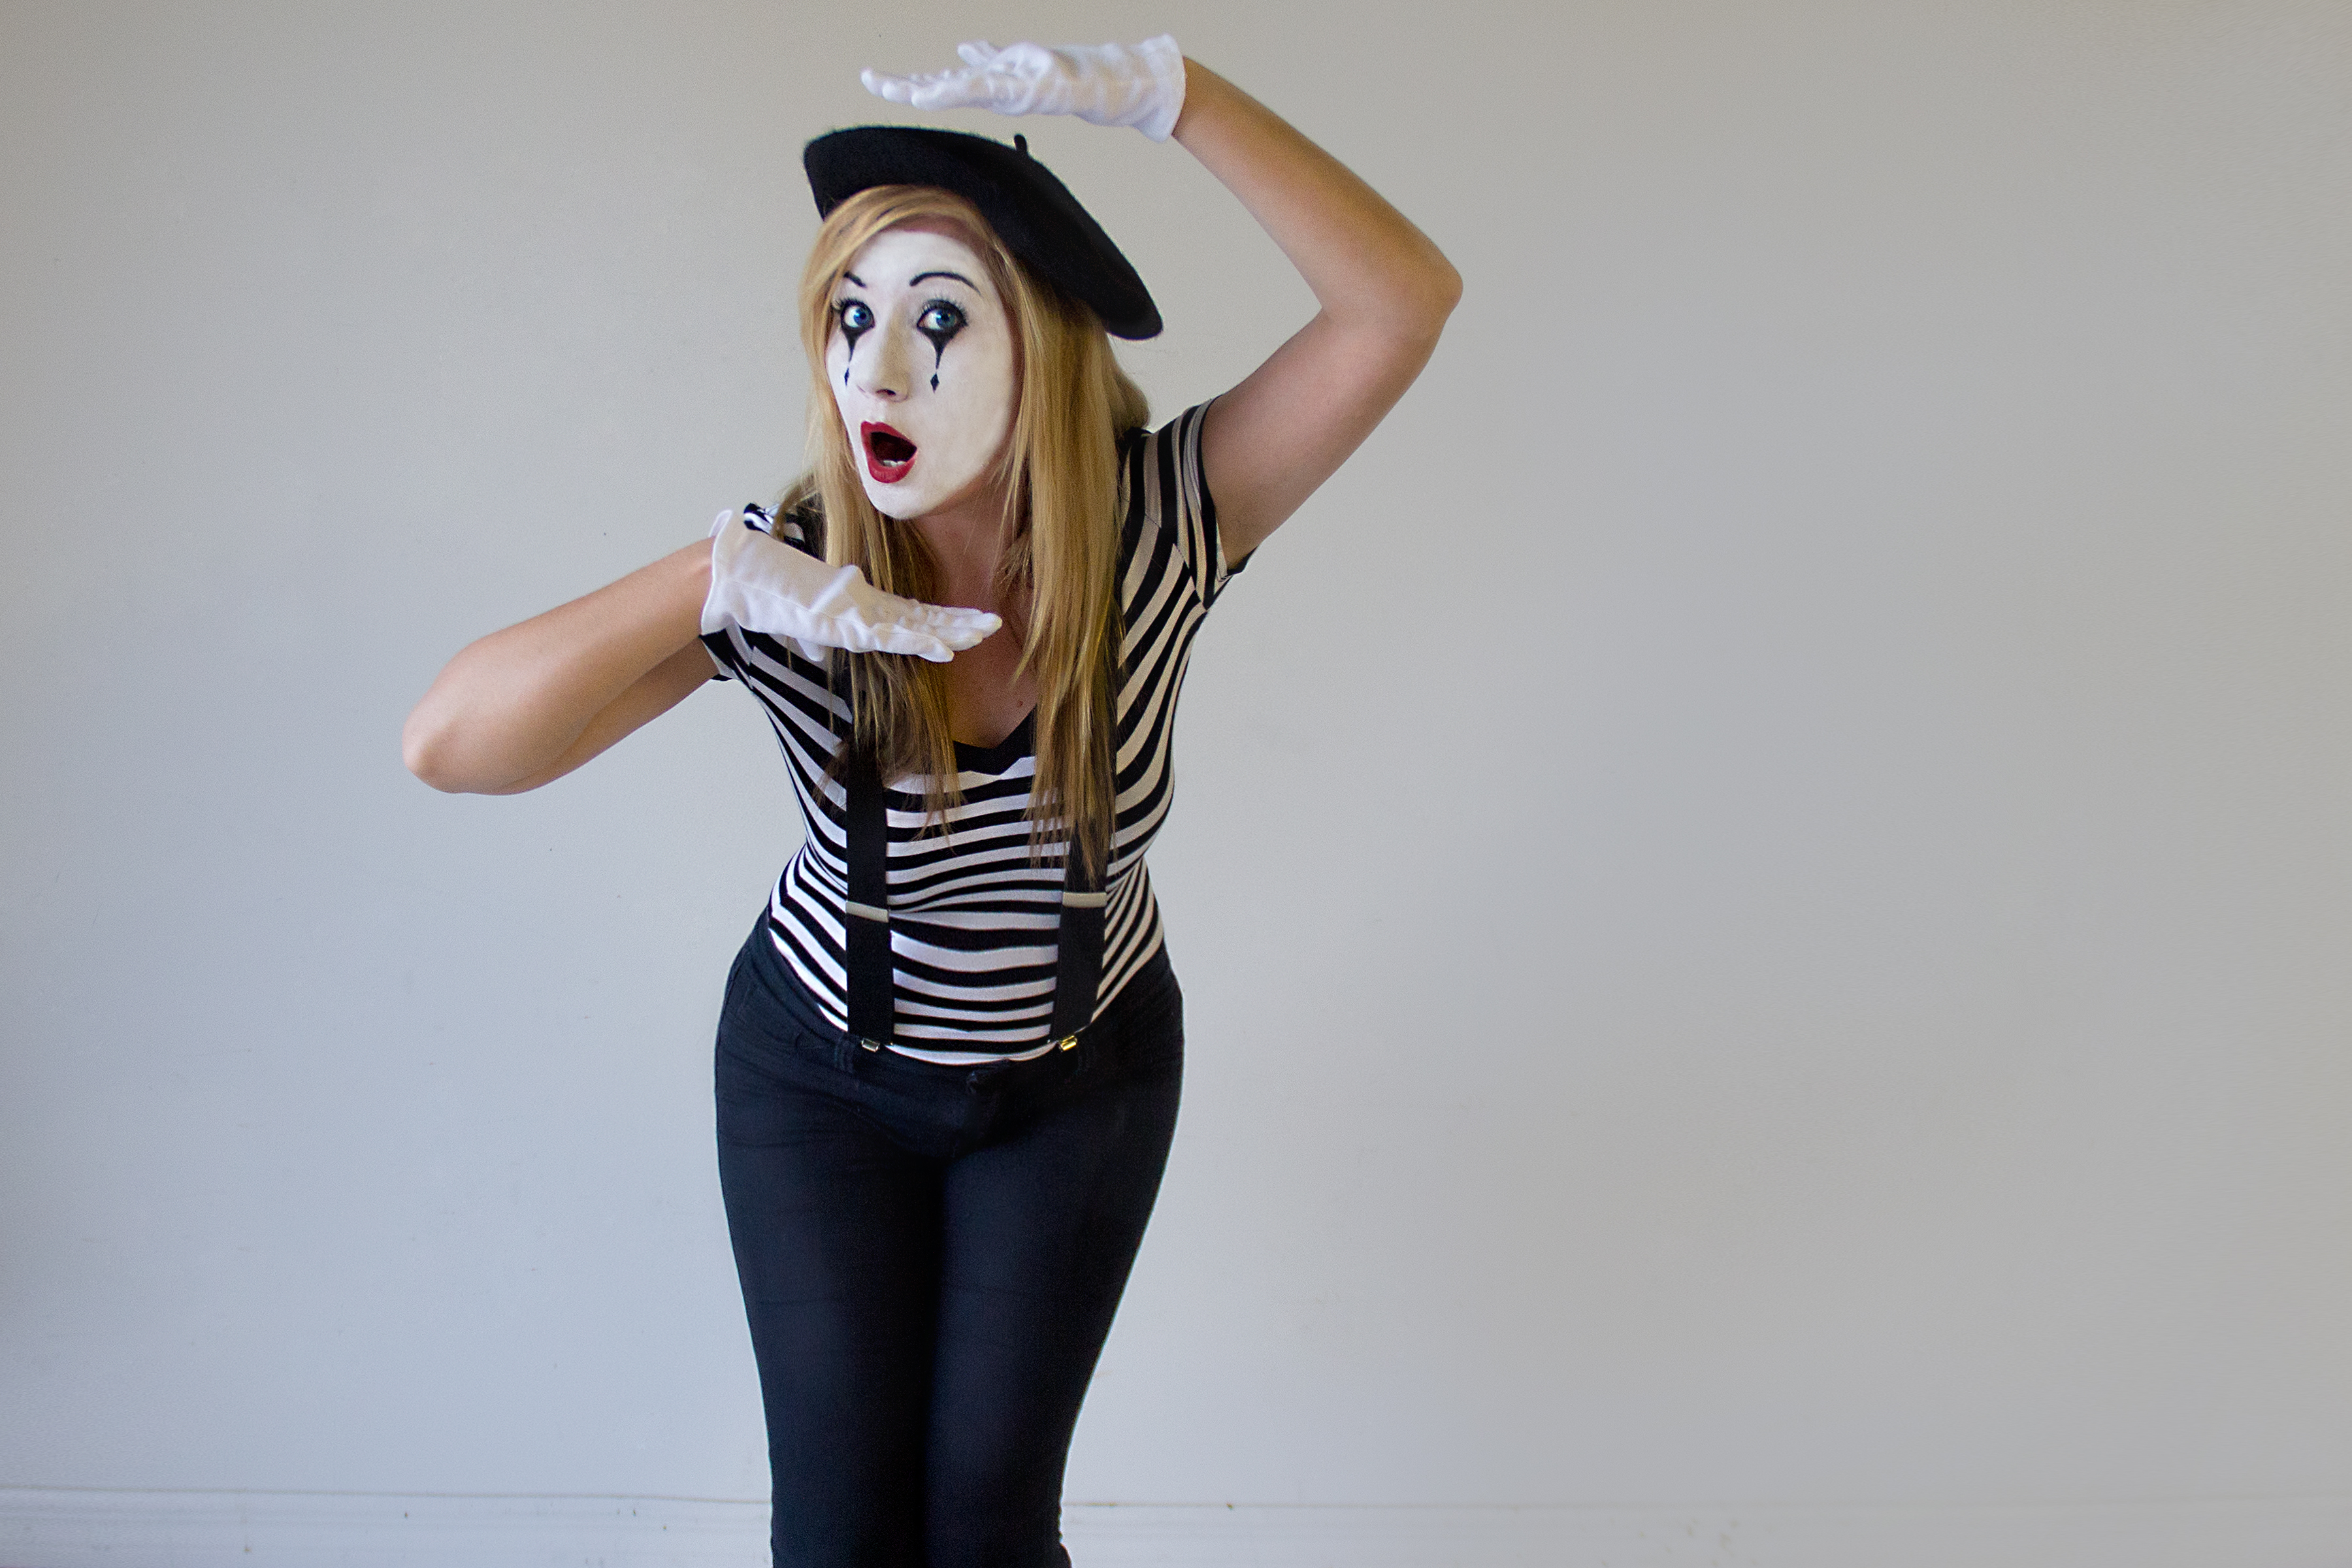 How to Make Your Own Costume | ehow